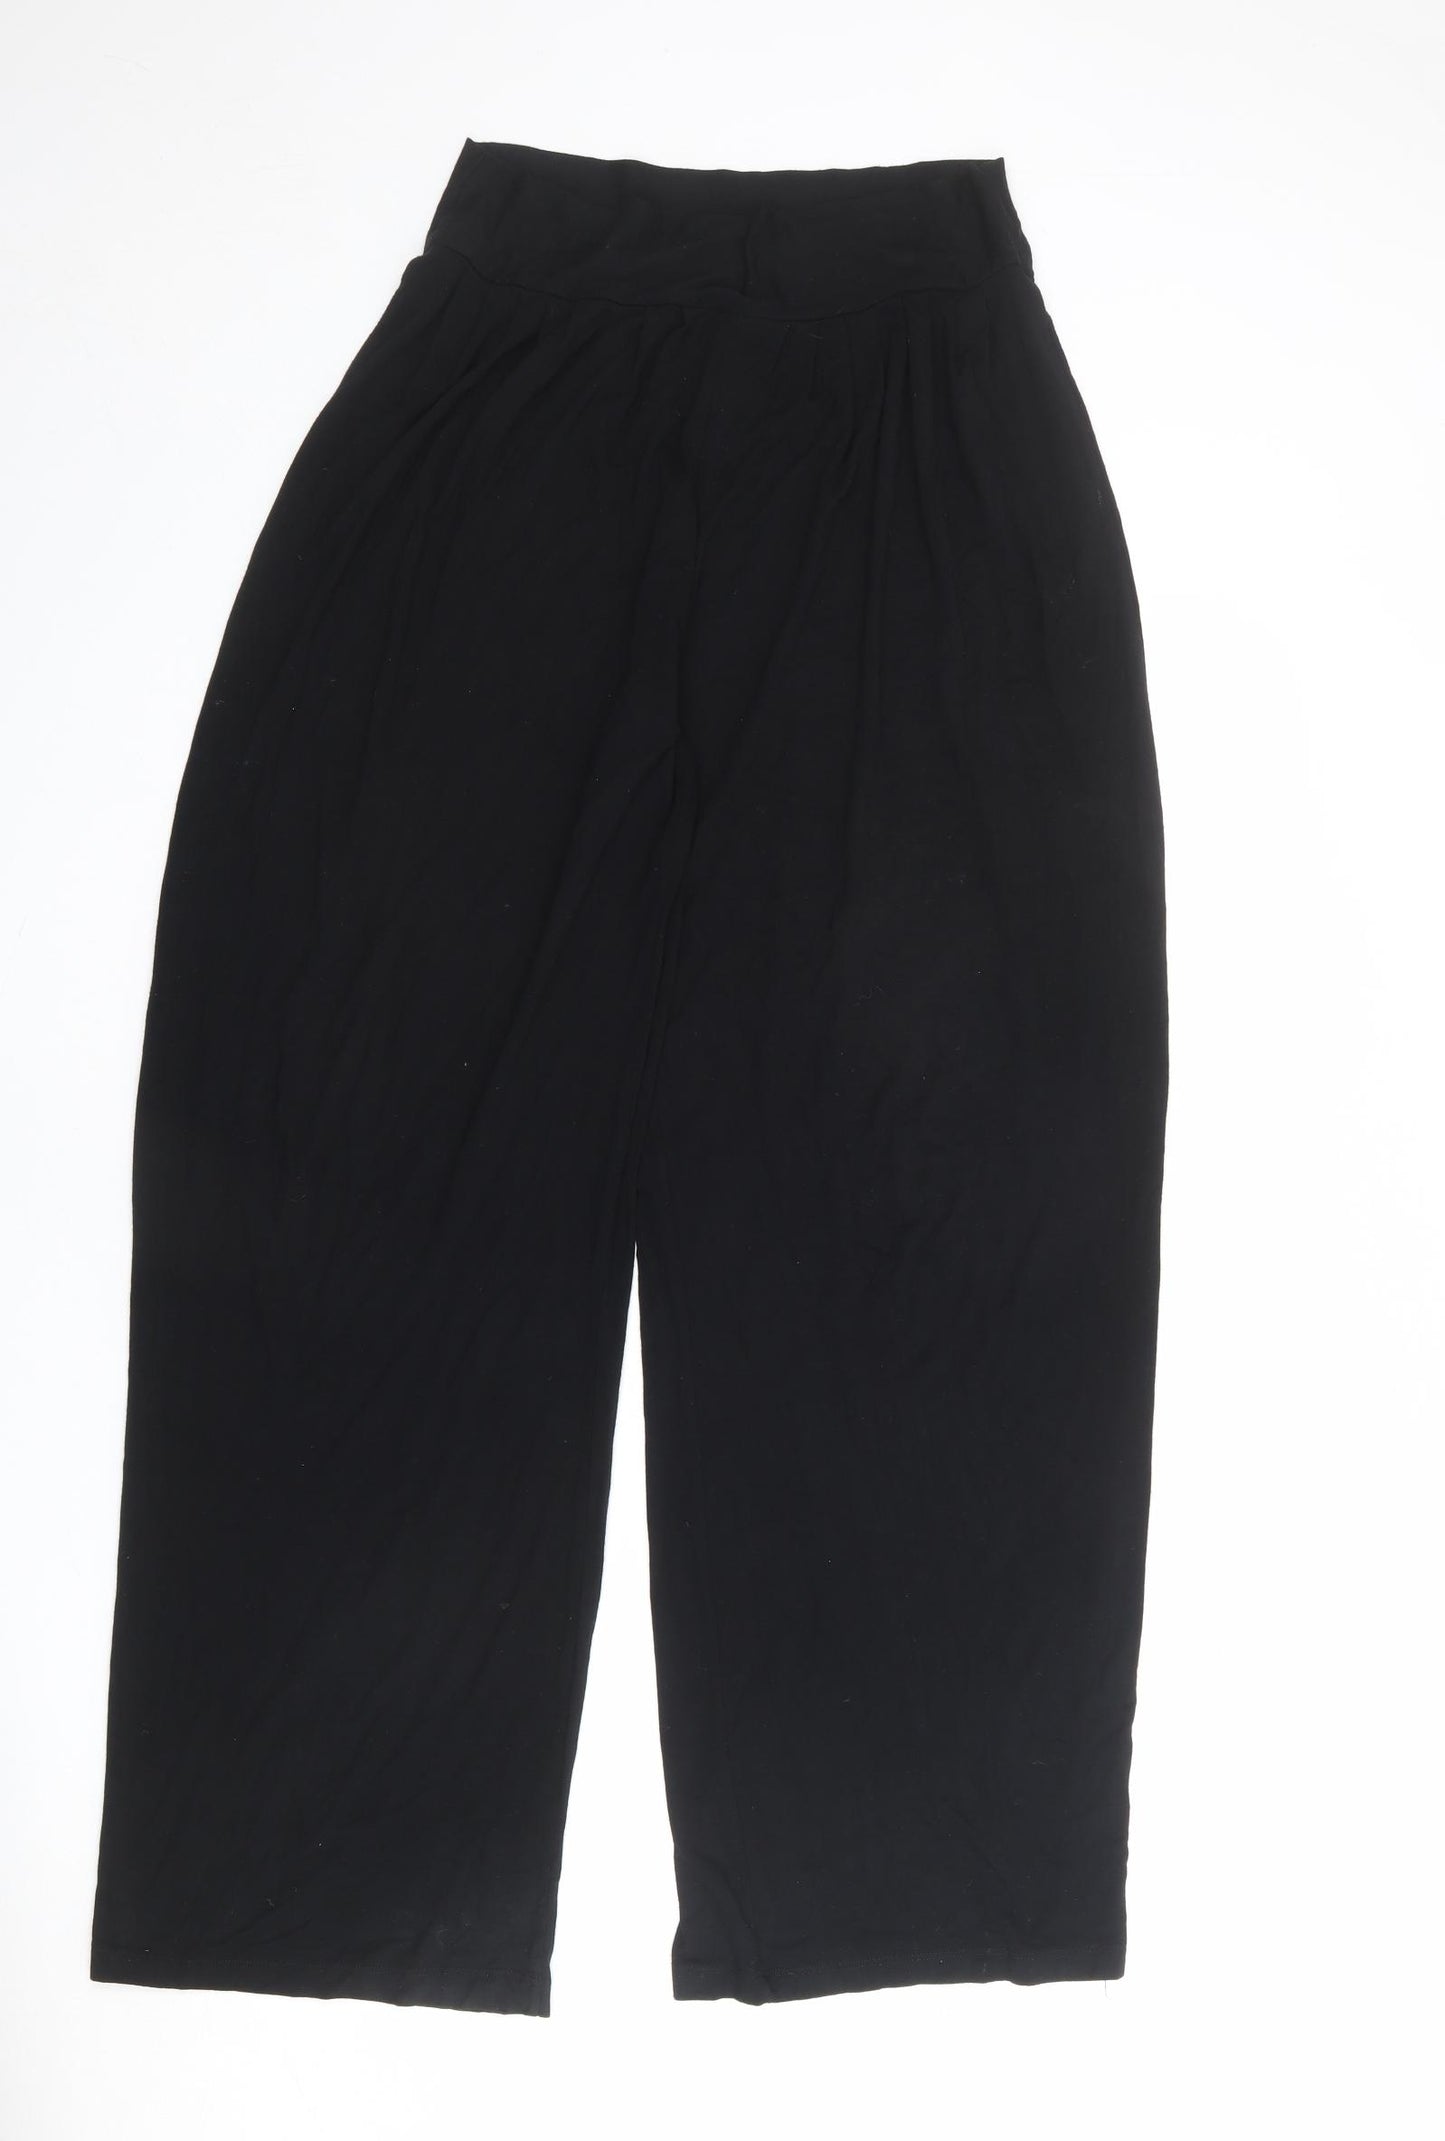 Marks and Spencer Womens Black Viscose Bloomer Trousers Size 14 L30 in Regular